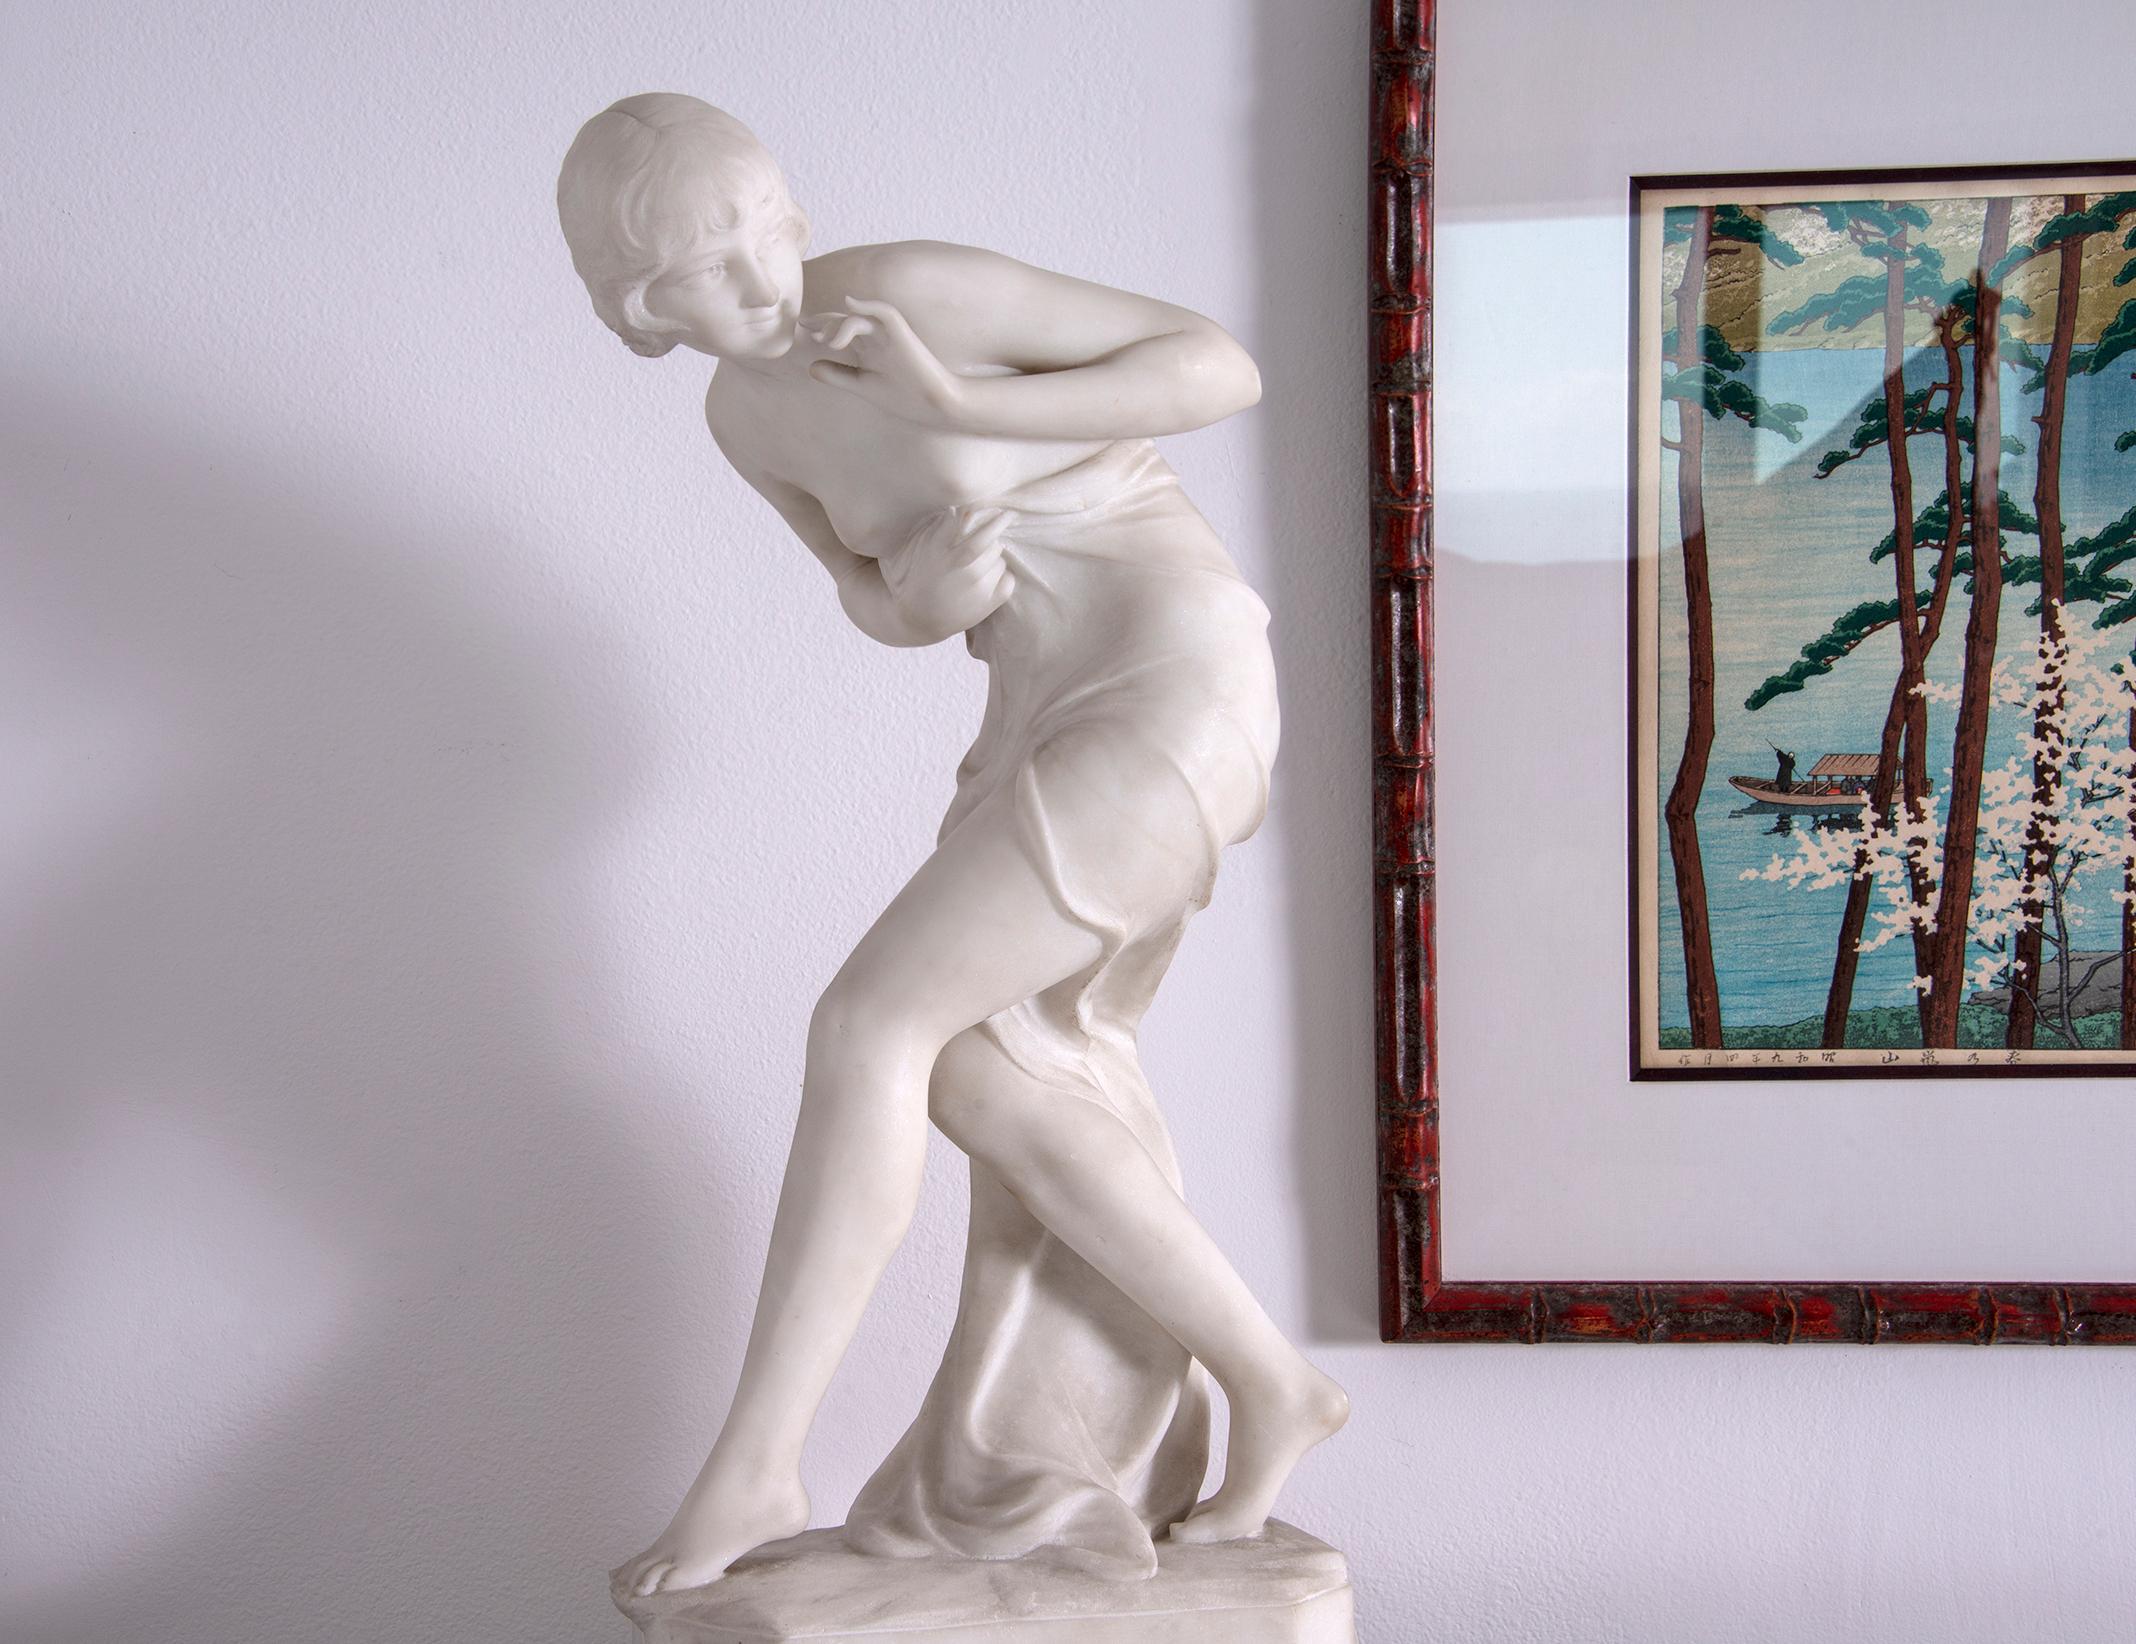 Deftly and elegantly craved marble of a partially drapped Art Deco beauty.   Signed C. Viviani on base.  Stunning!!!